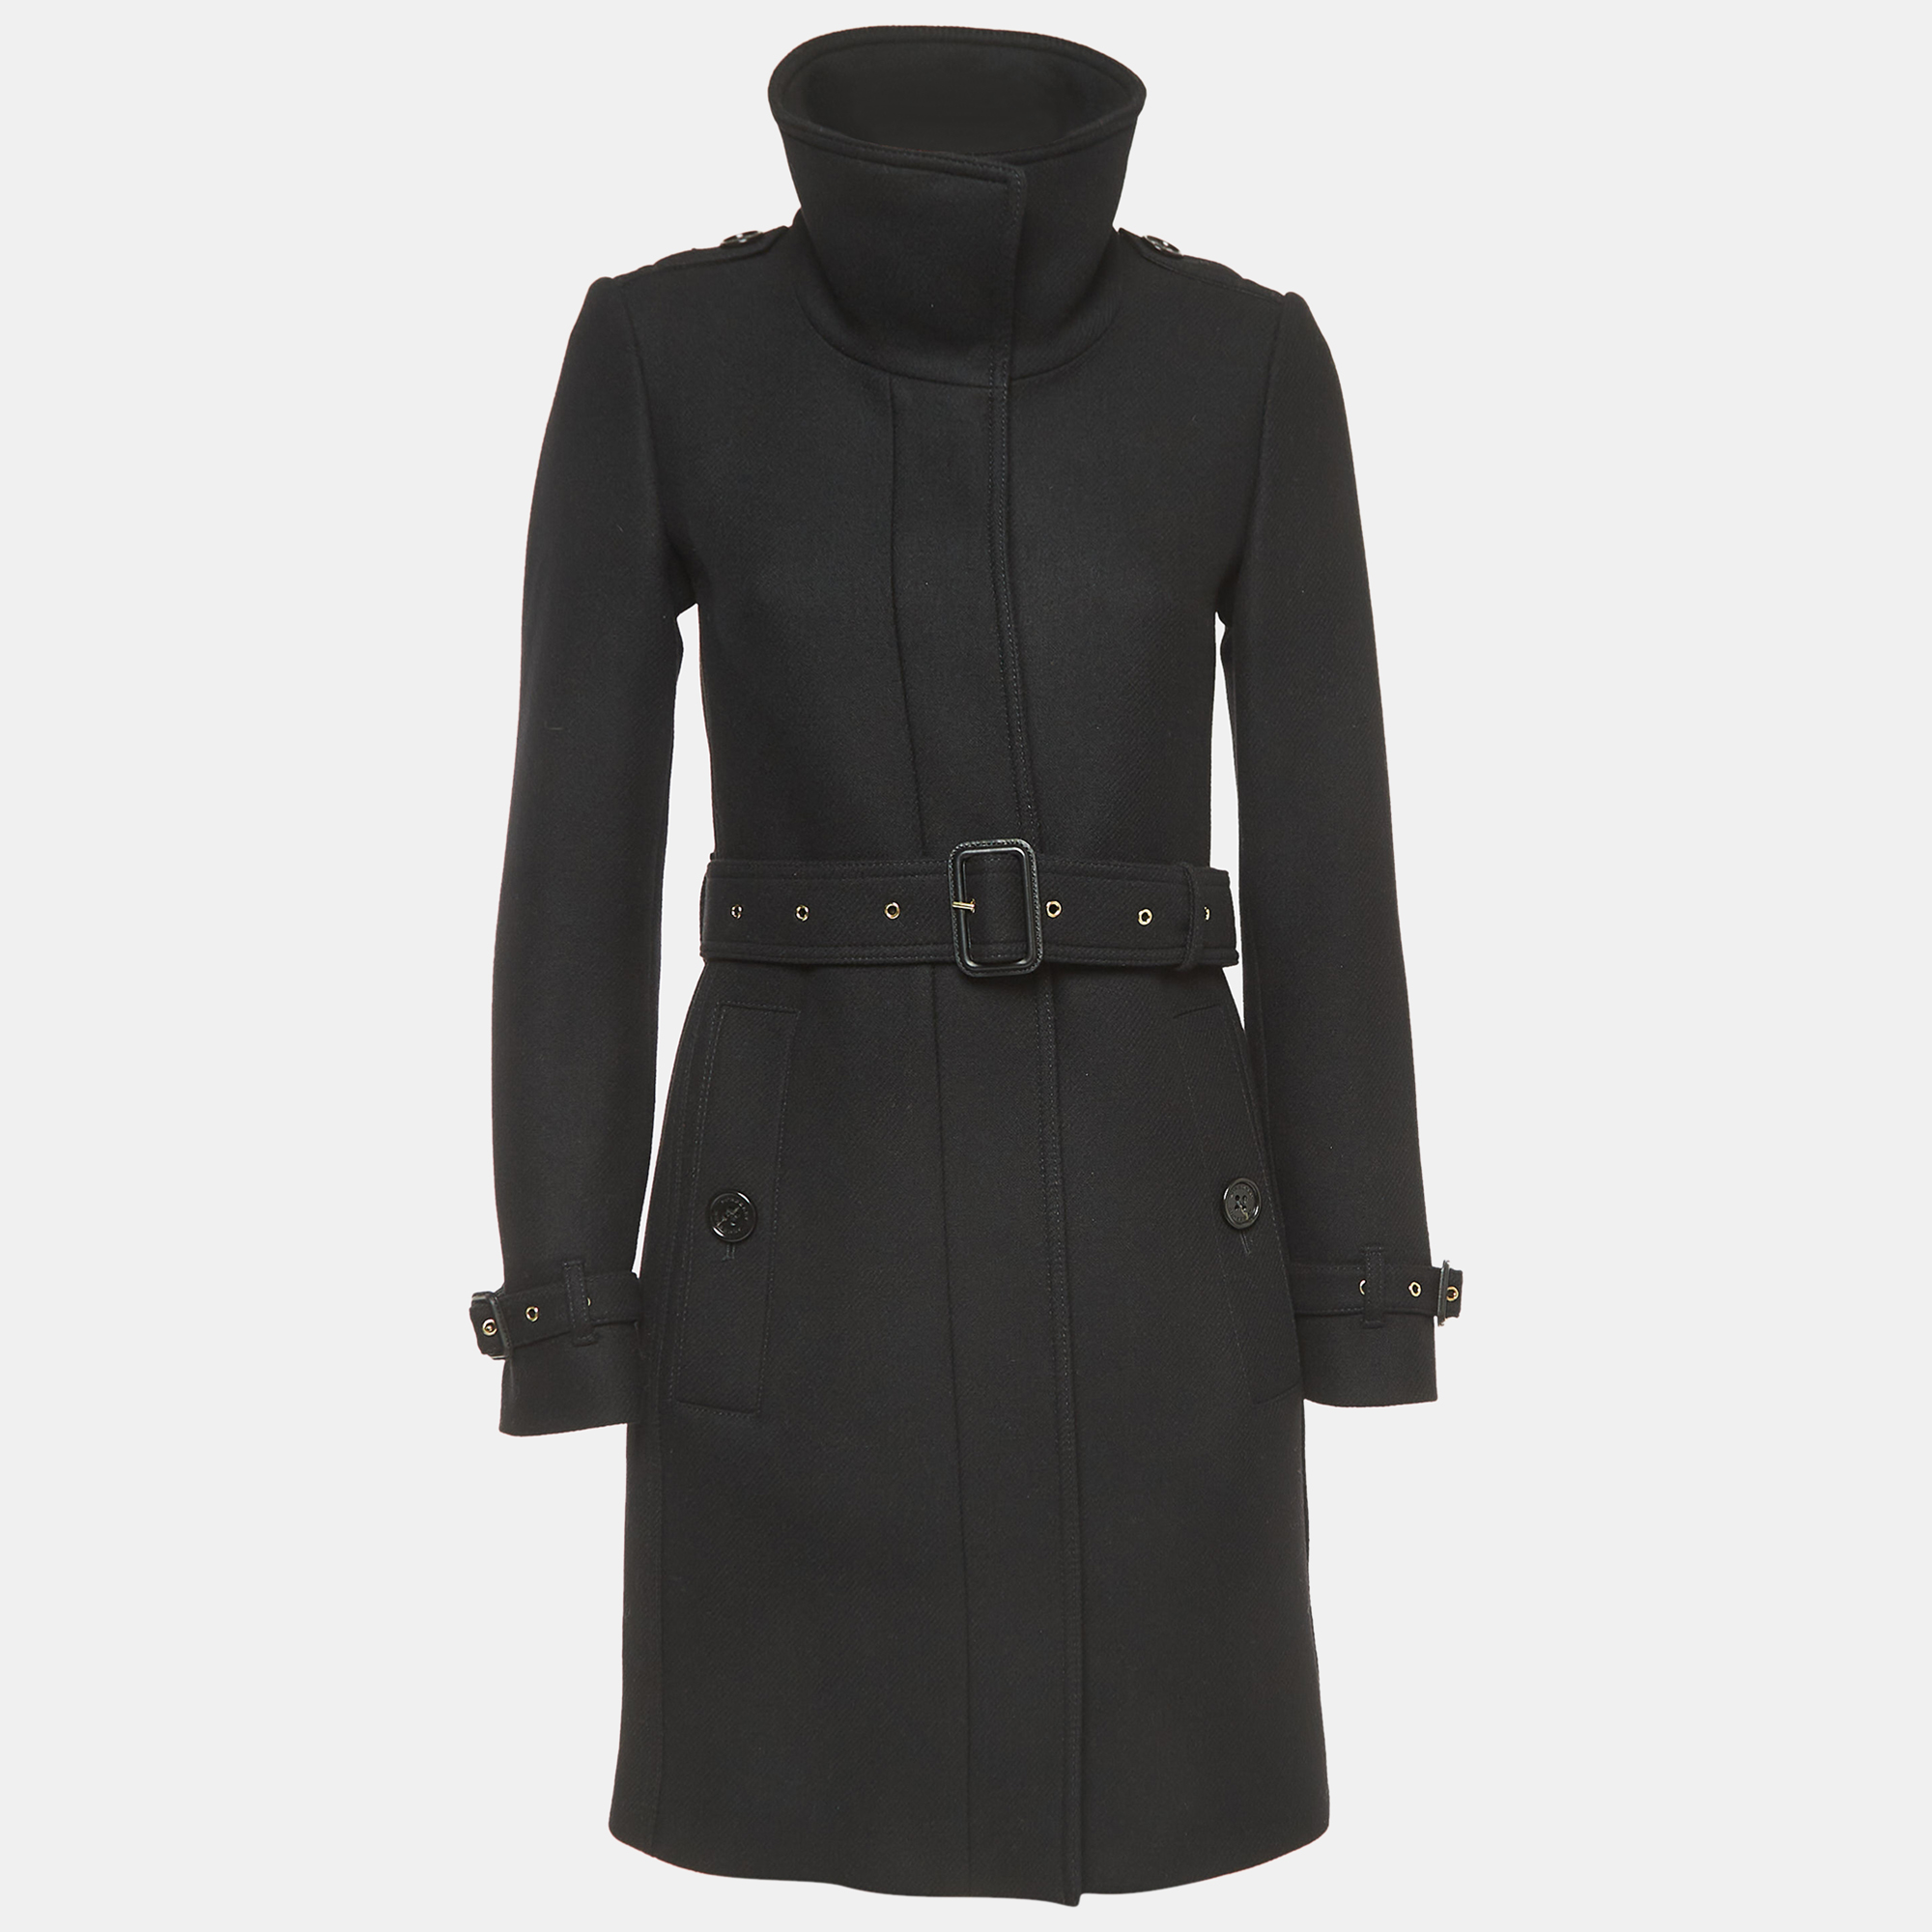 

Burberry Black Wool Blend Single Breasted Belted Trench Coat